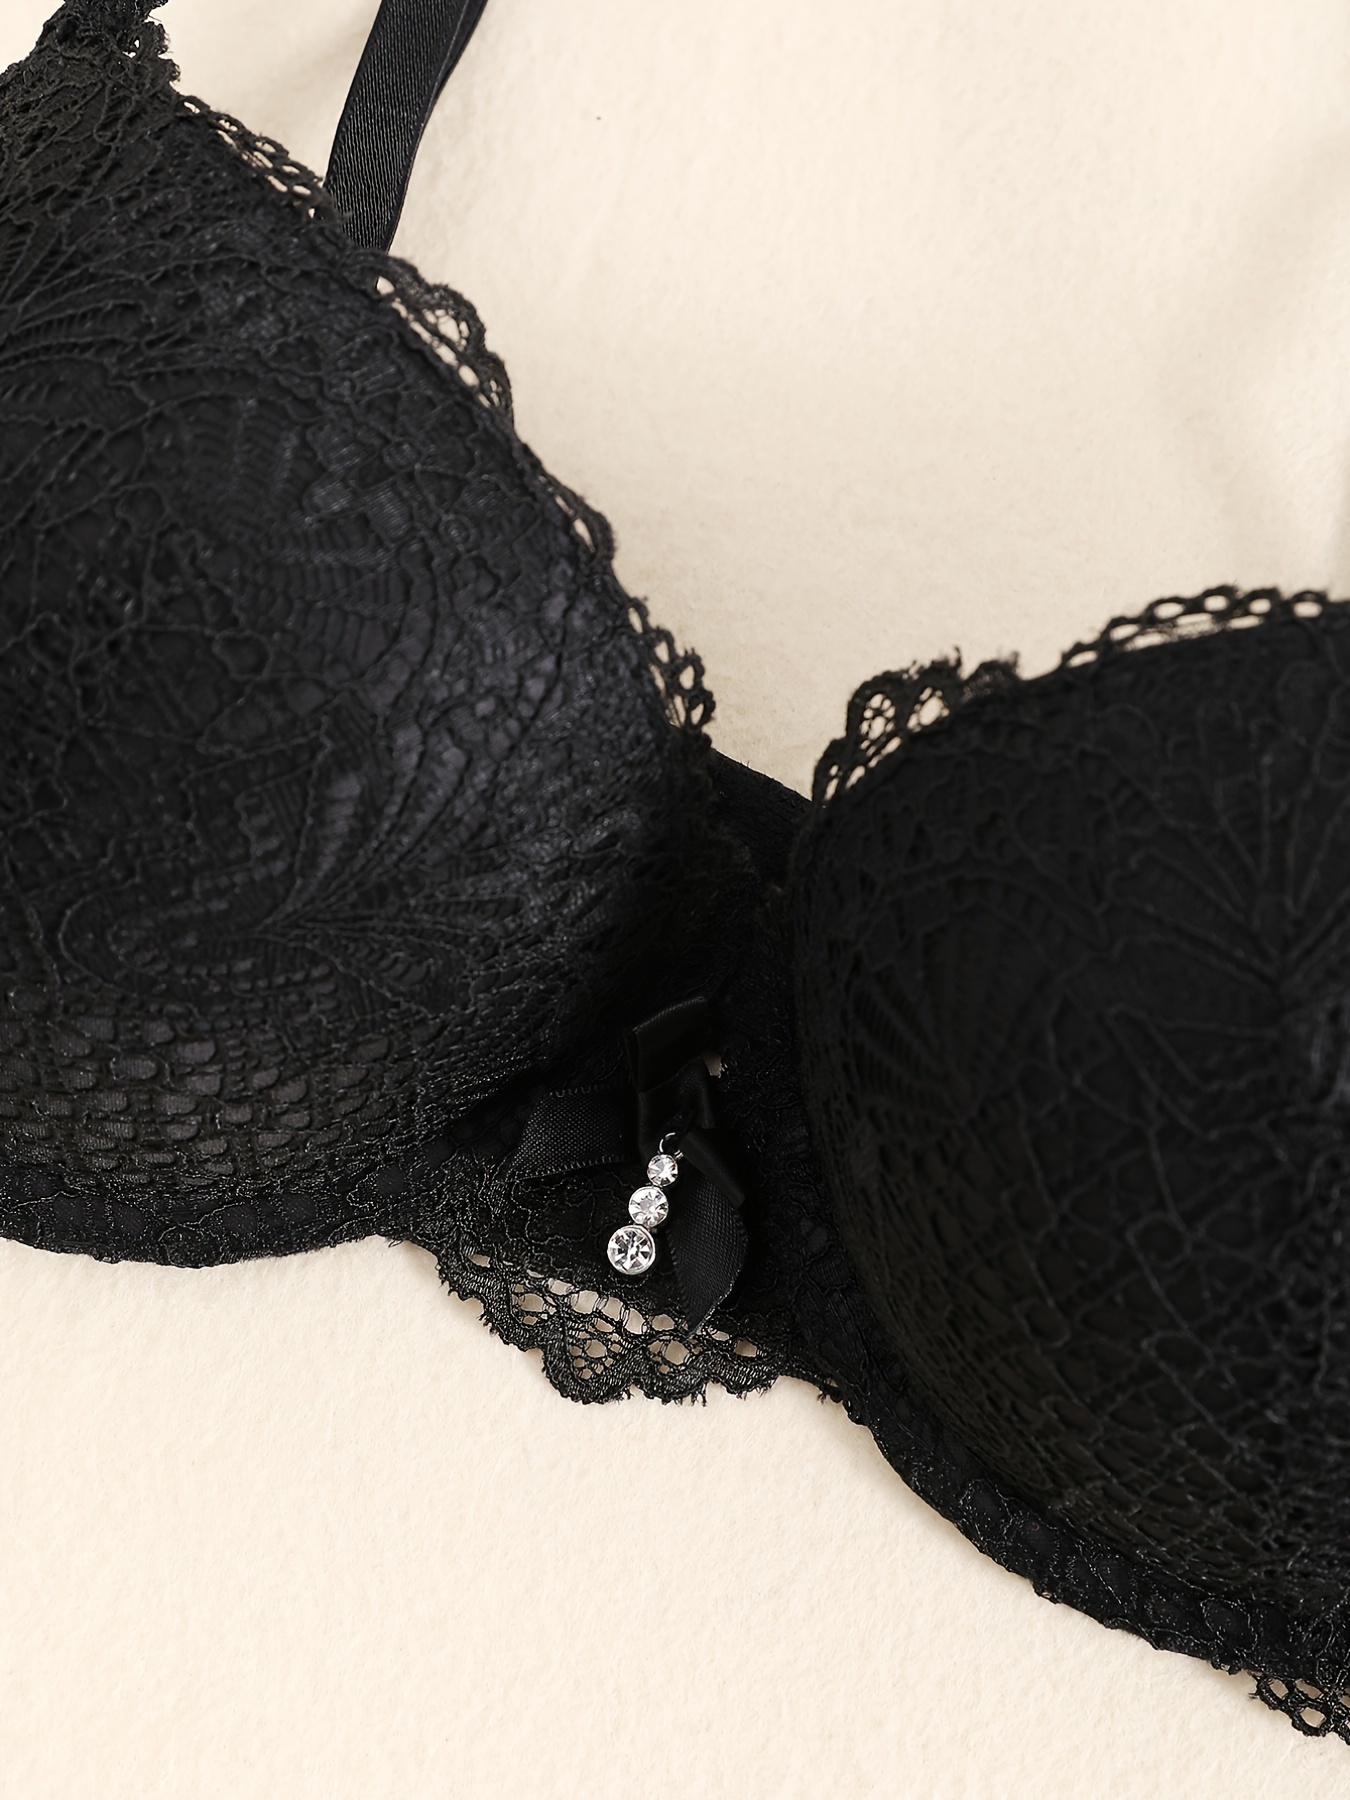 Elegant Seamless Push Up Lace Bra For Women With Cute Charm #11690